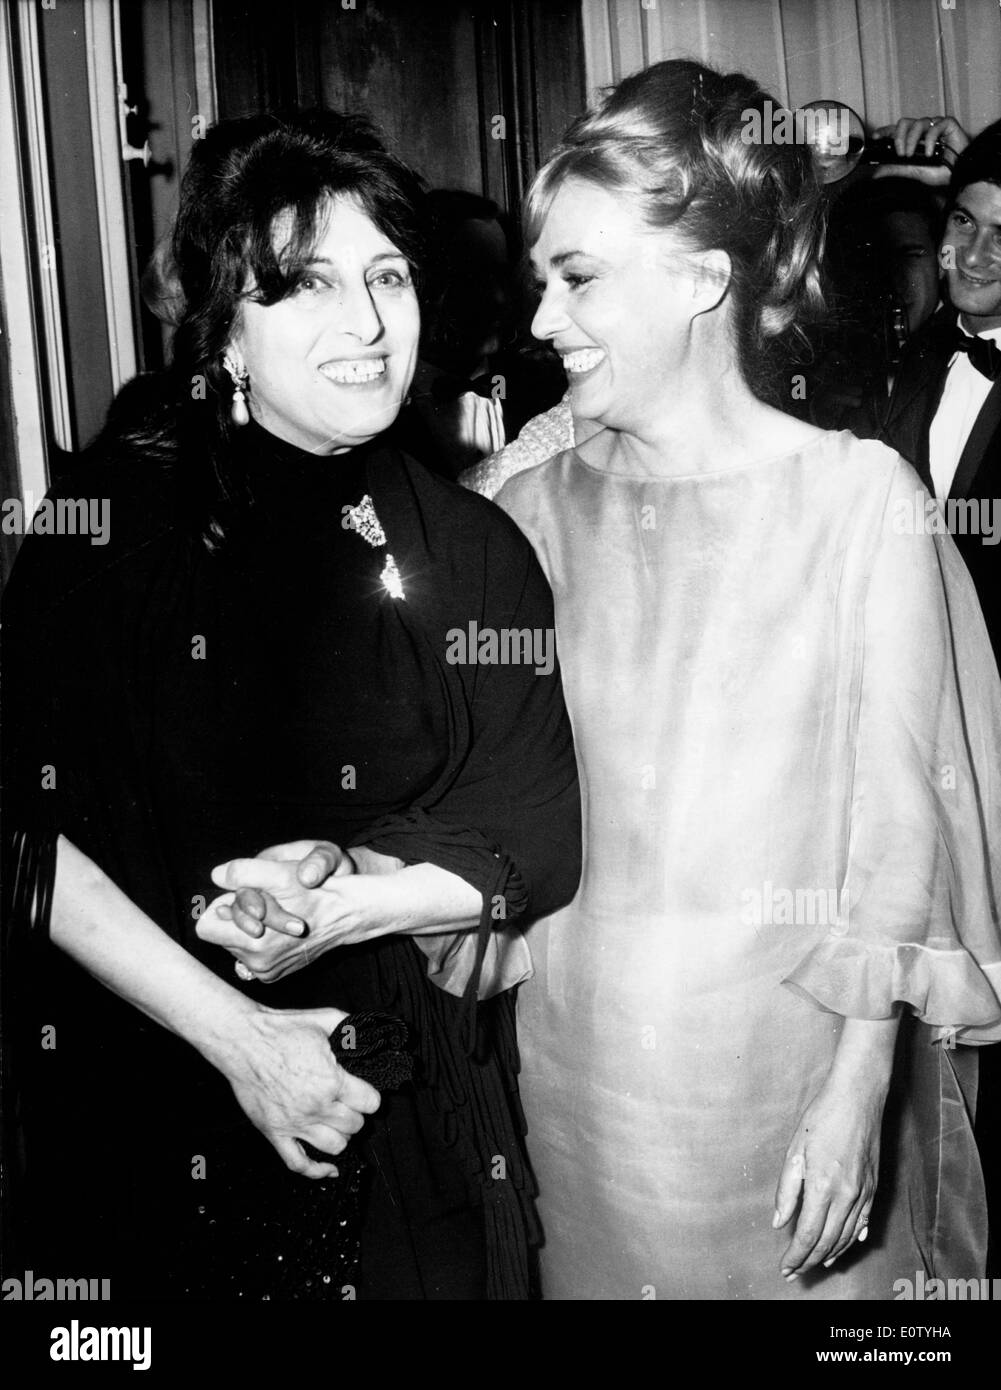 Actresses Anna Magnani and Jeanne Moreau at party Stock Photo